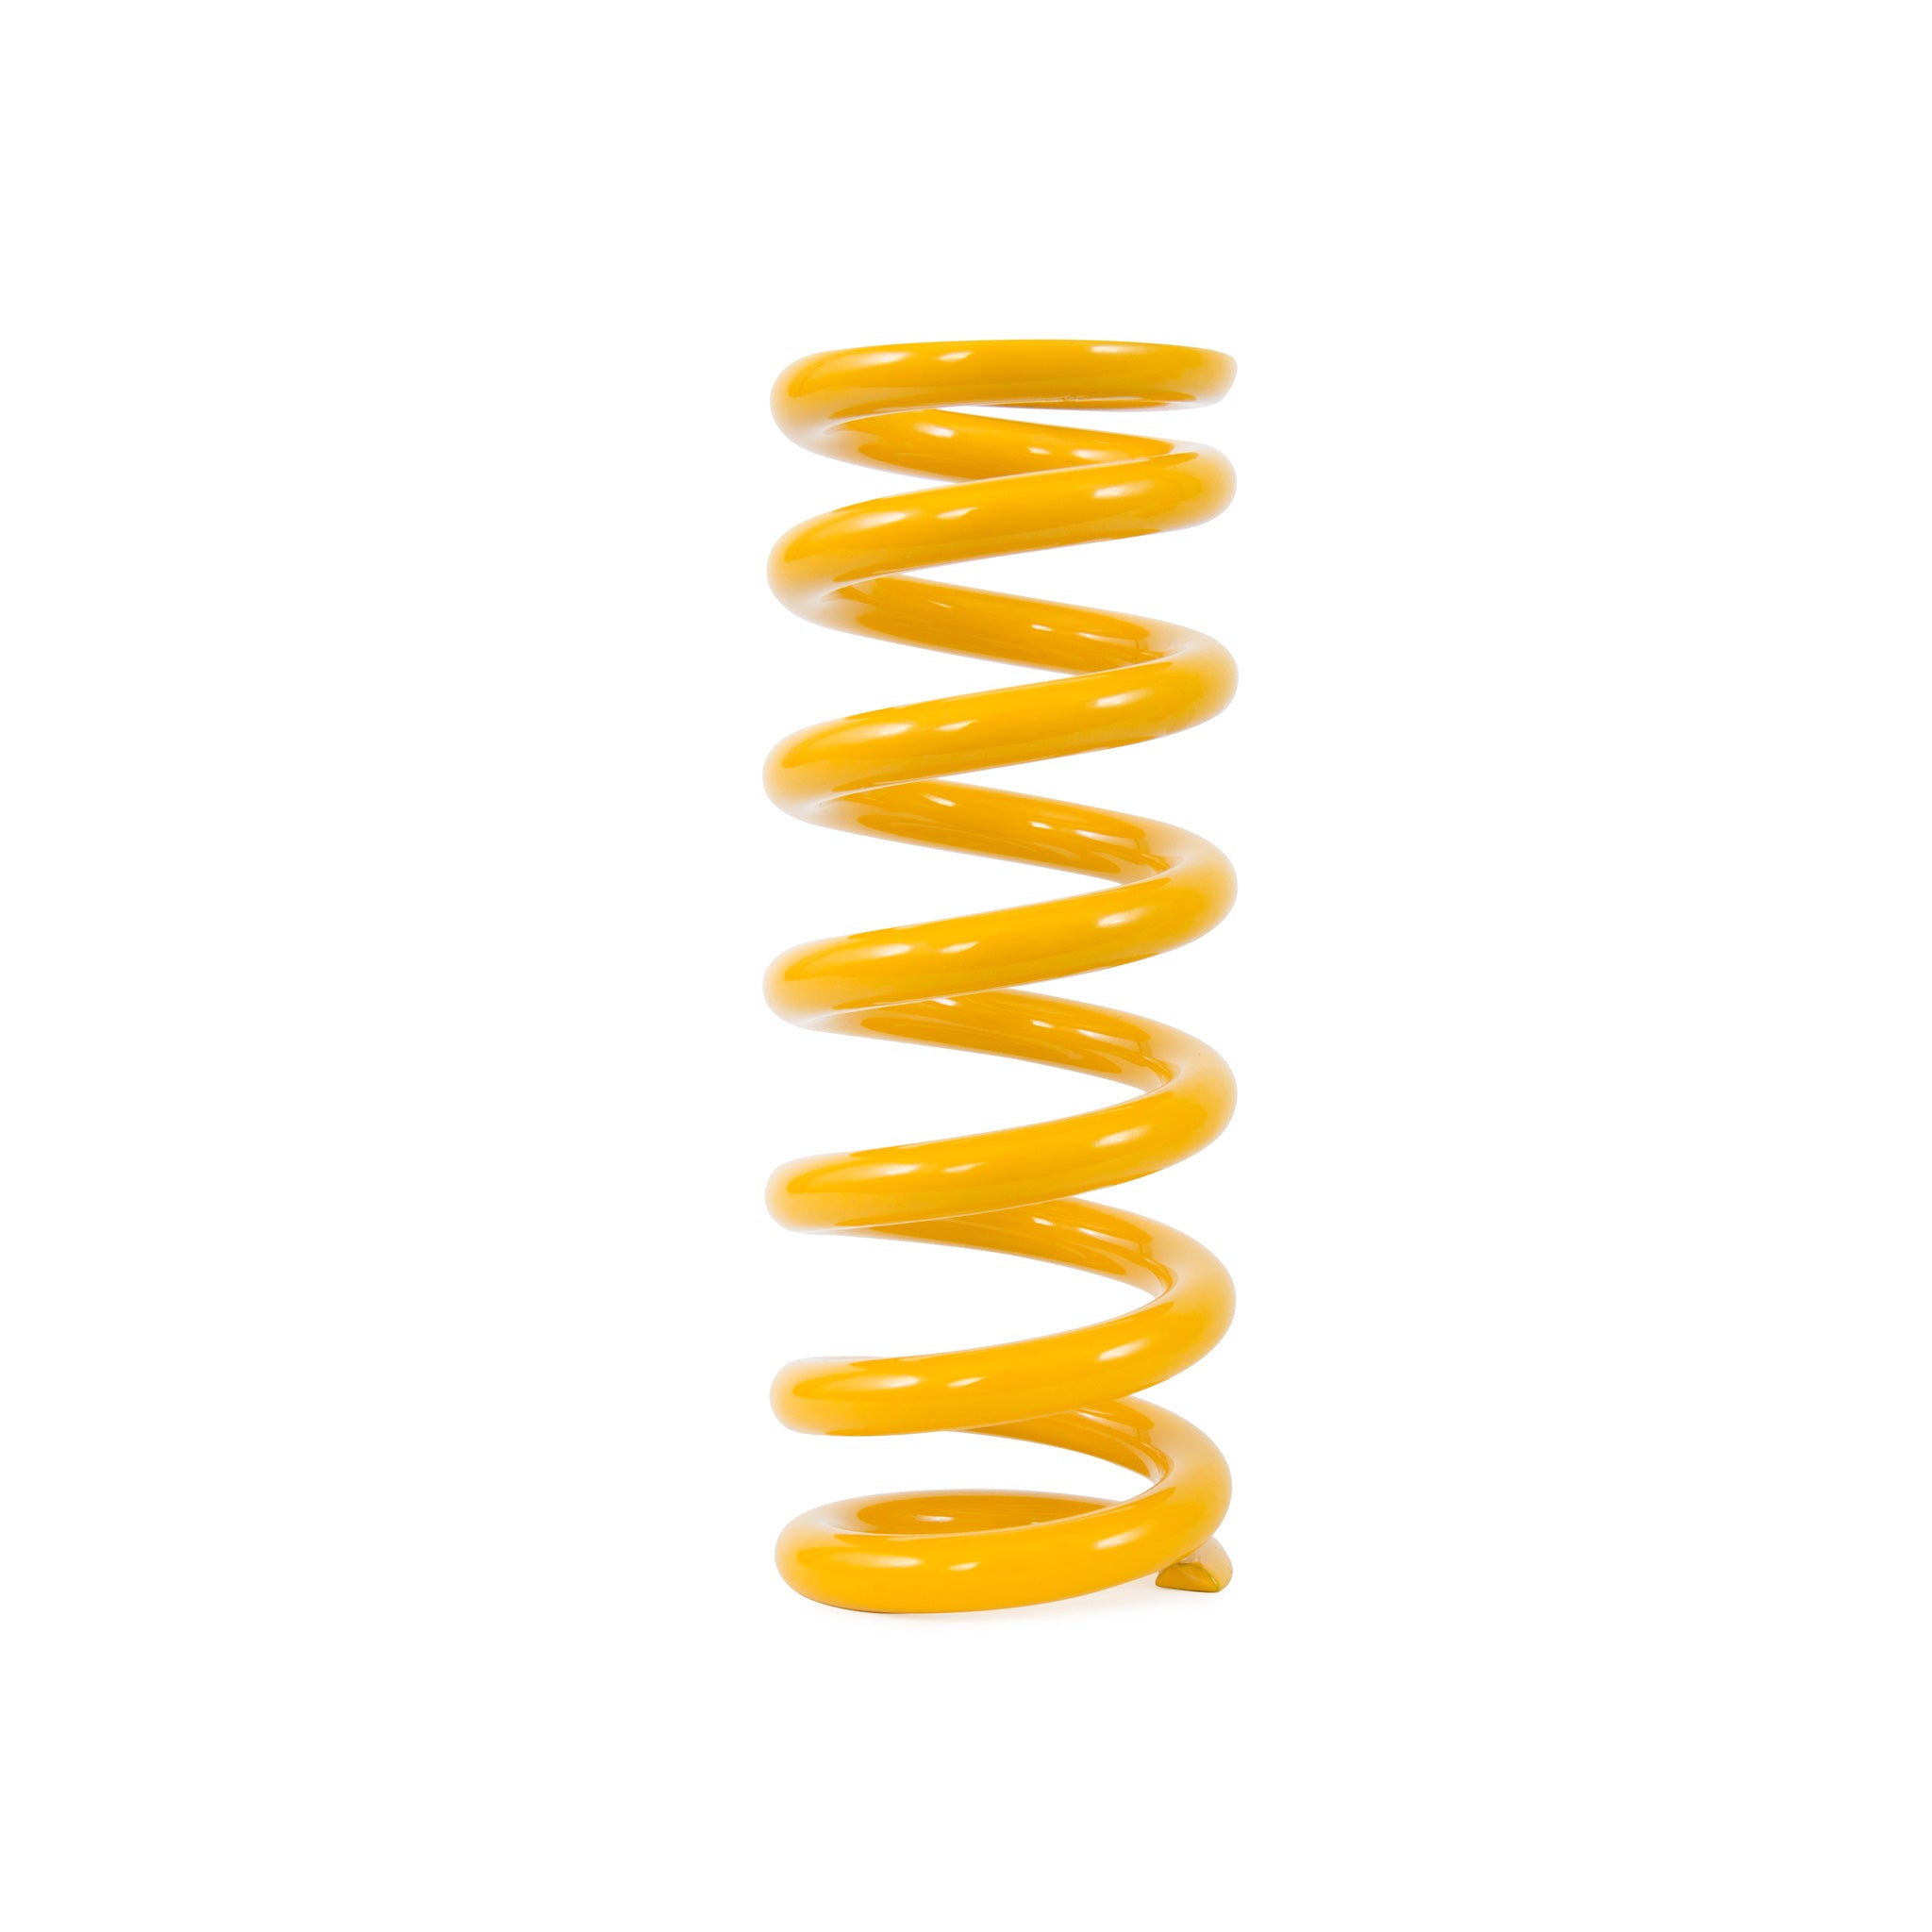 Ohlins Light Weight Spring 57mm S x 525 lbs/in